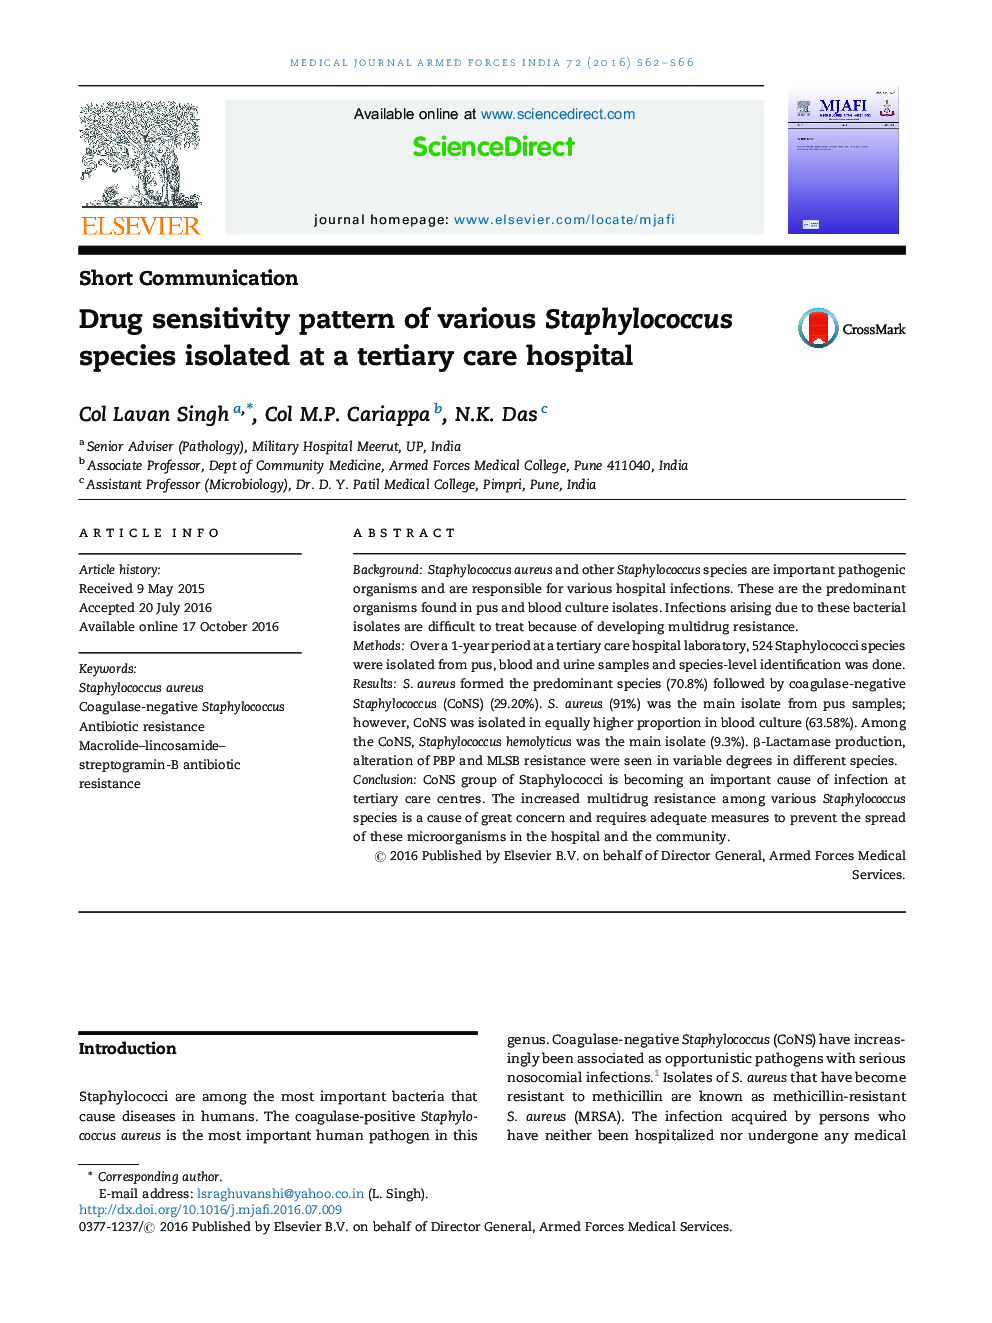 Drug sensitivity pattern of various Staphylococcus species isolated at a tertiary care hospital